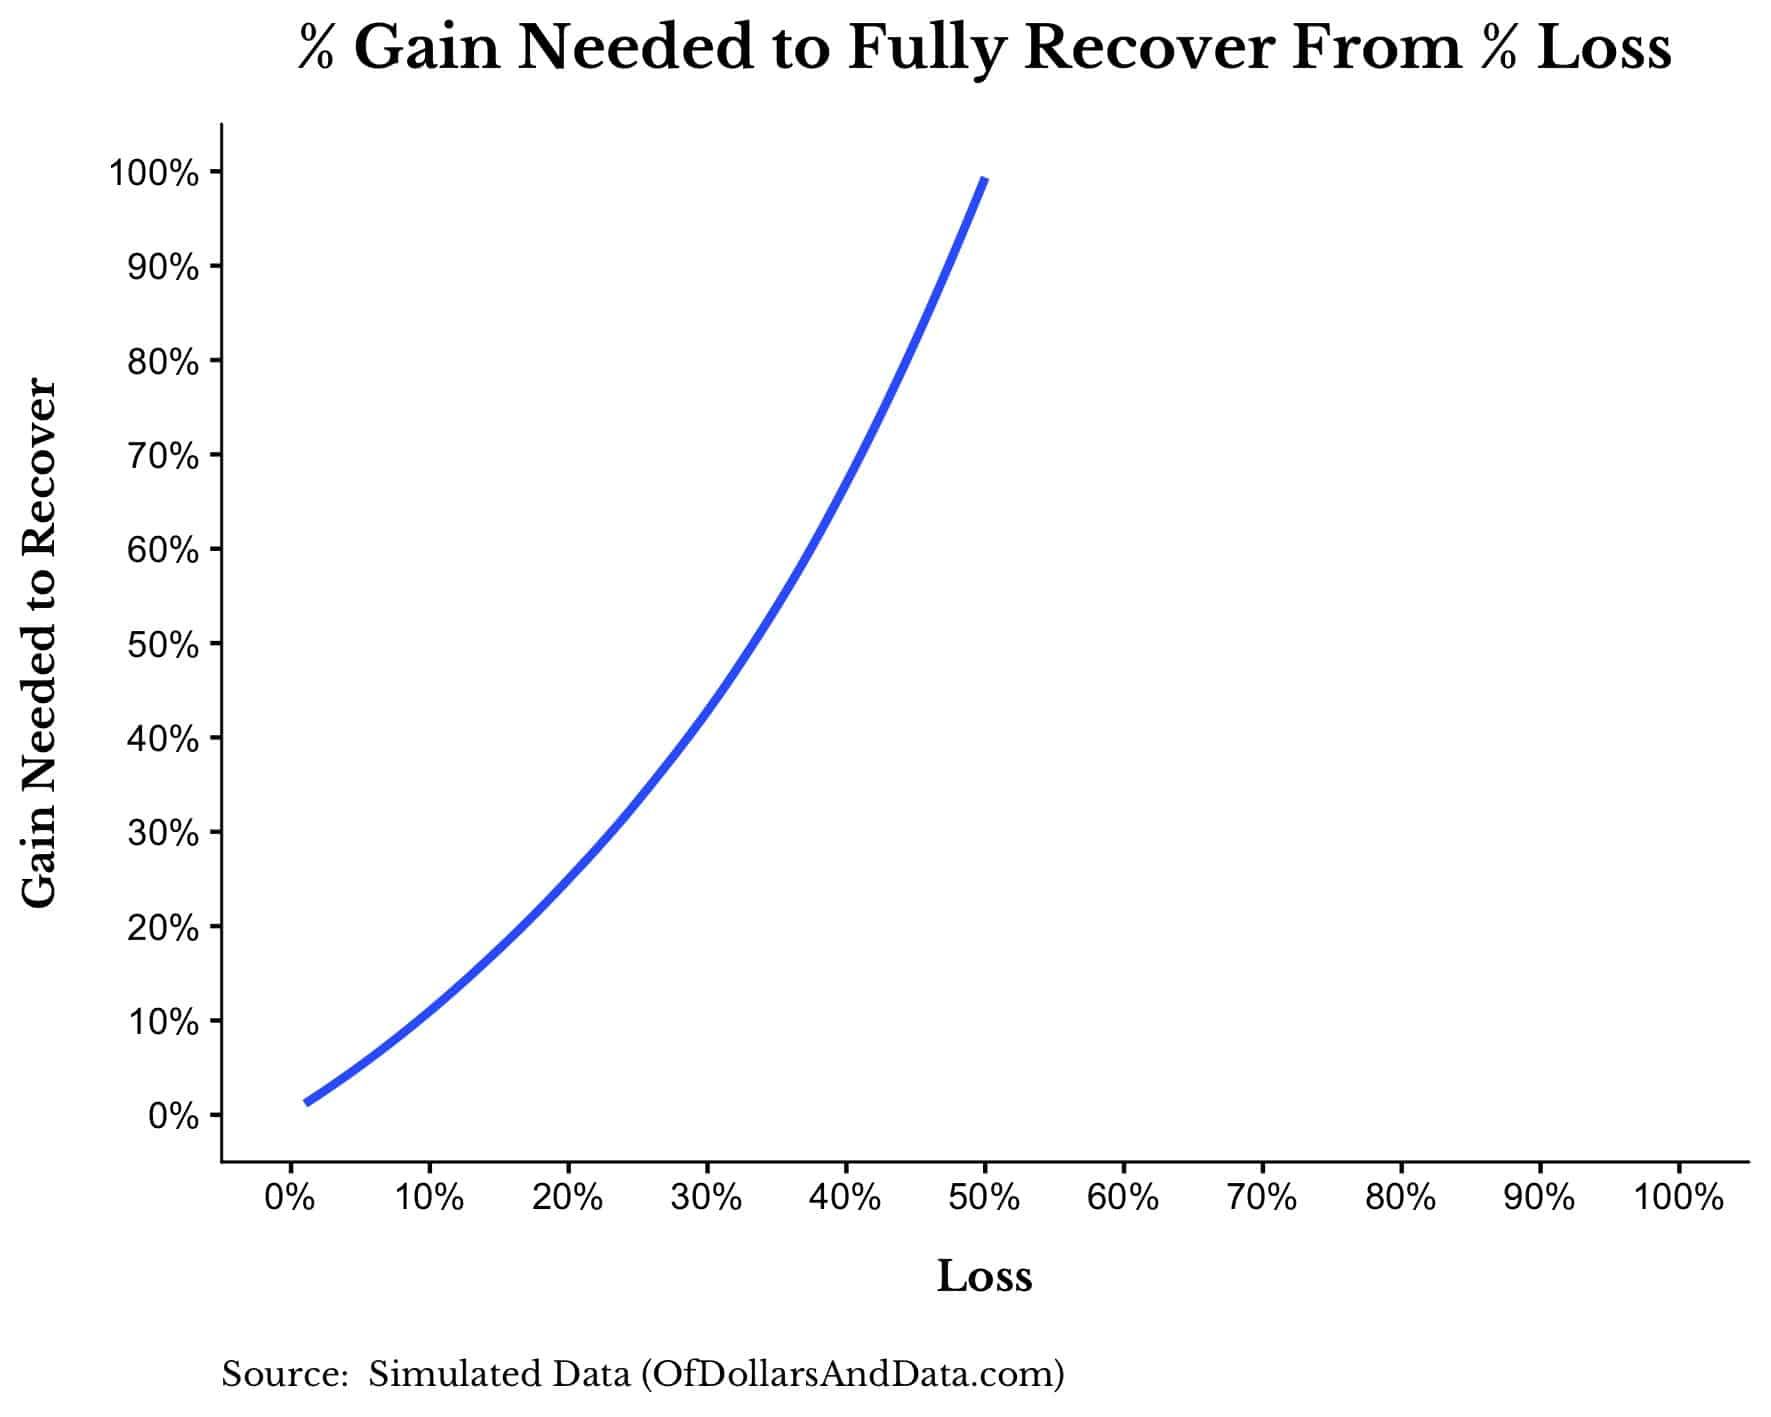 Percentage gain needed to fully recover from a given percentage loss